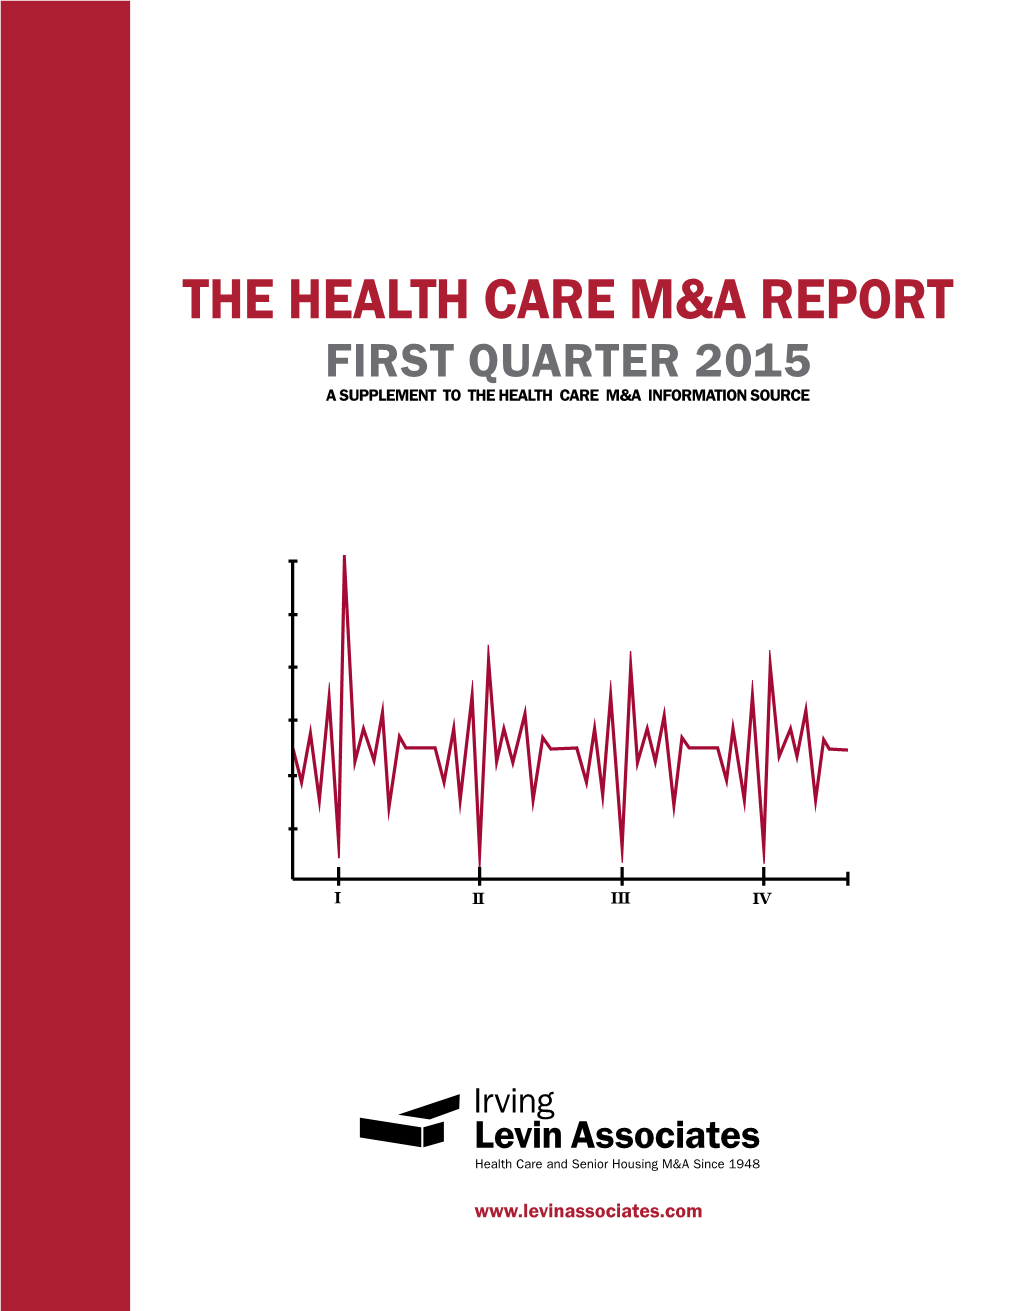 The Health Care M&A Report